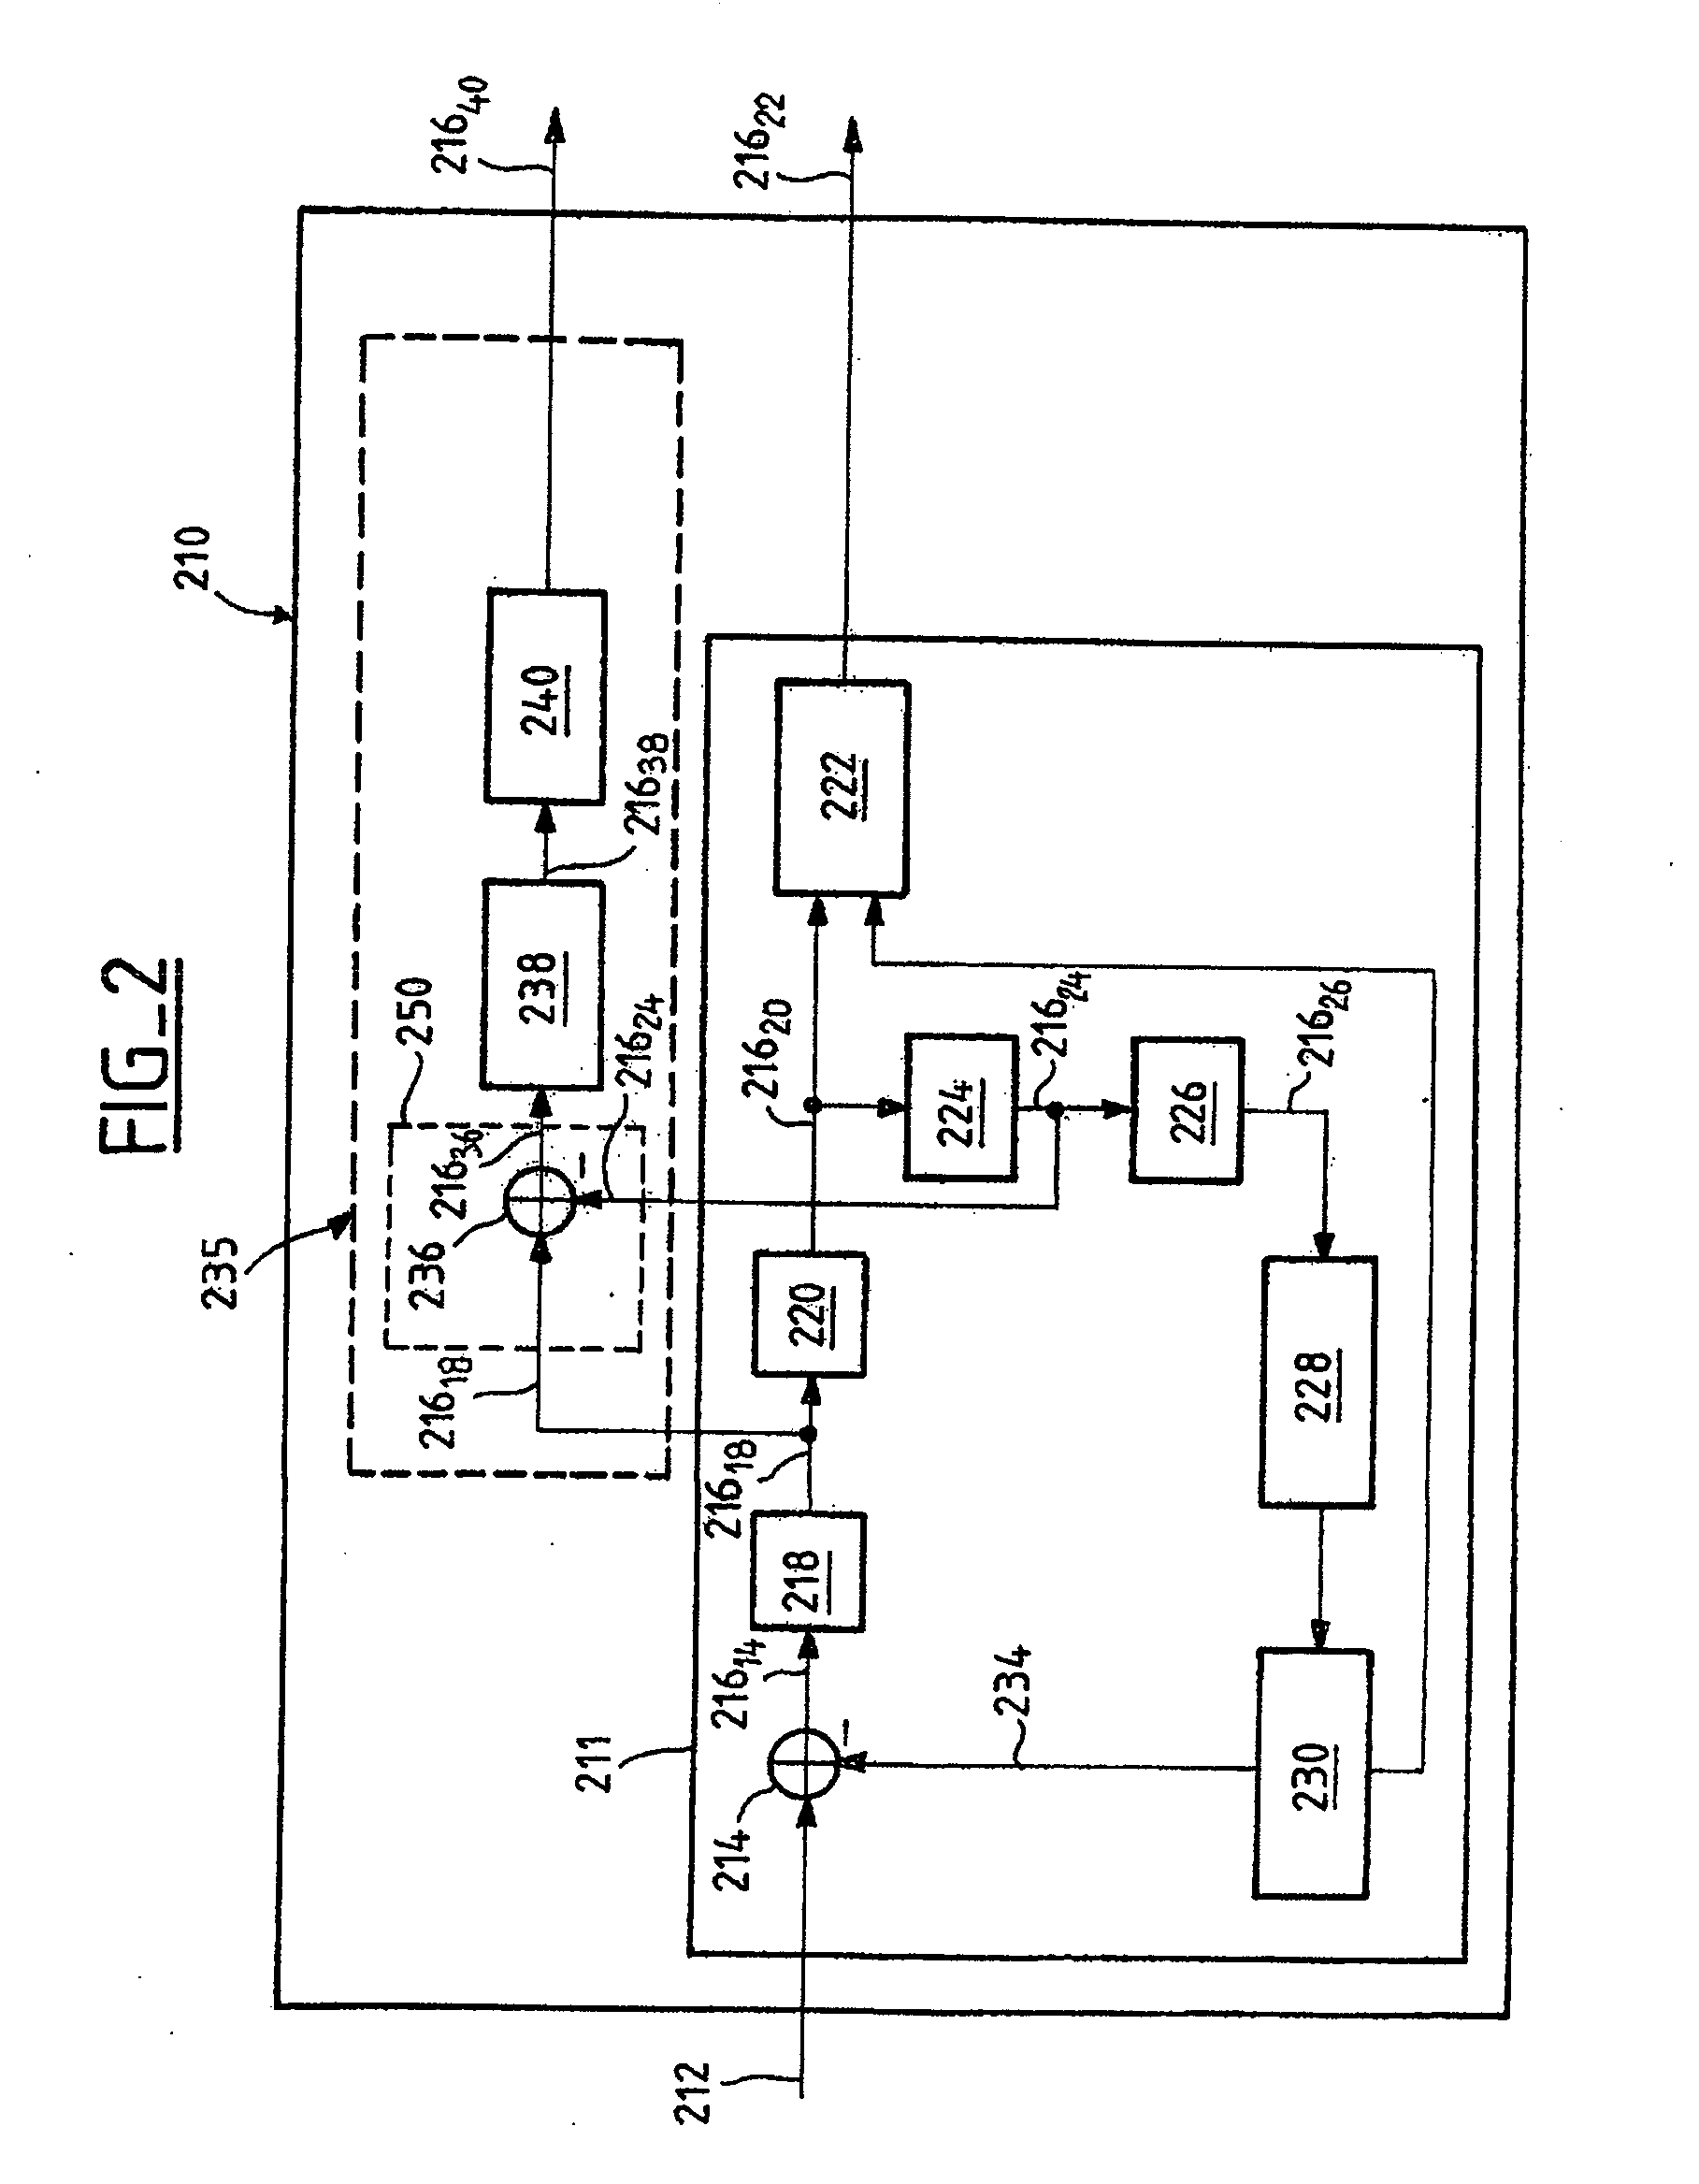 Device and method for compressing digital images